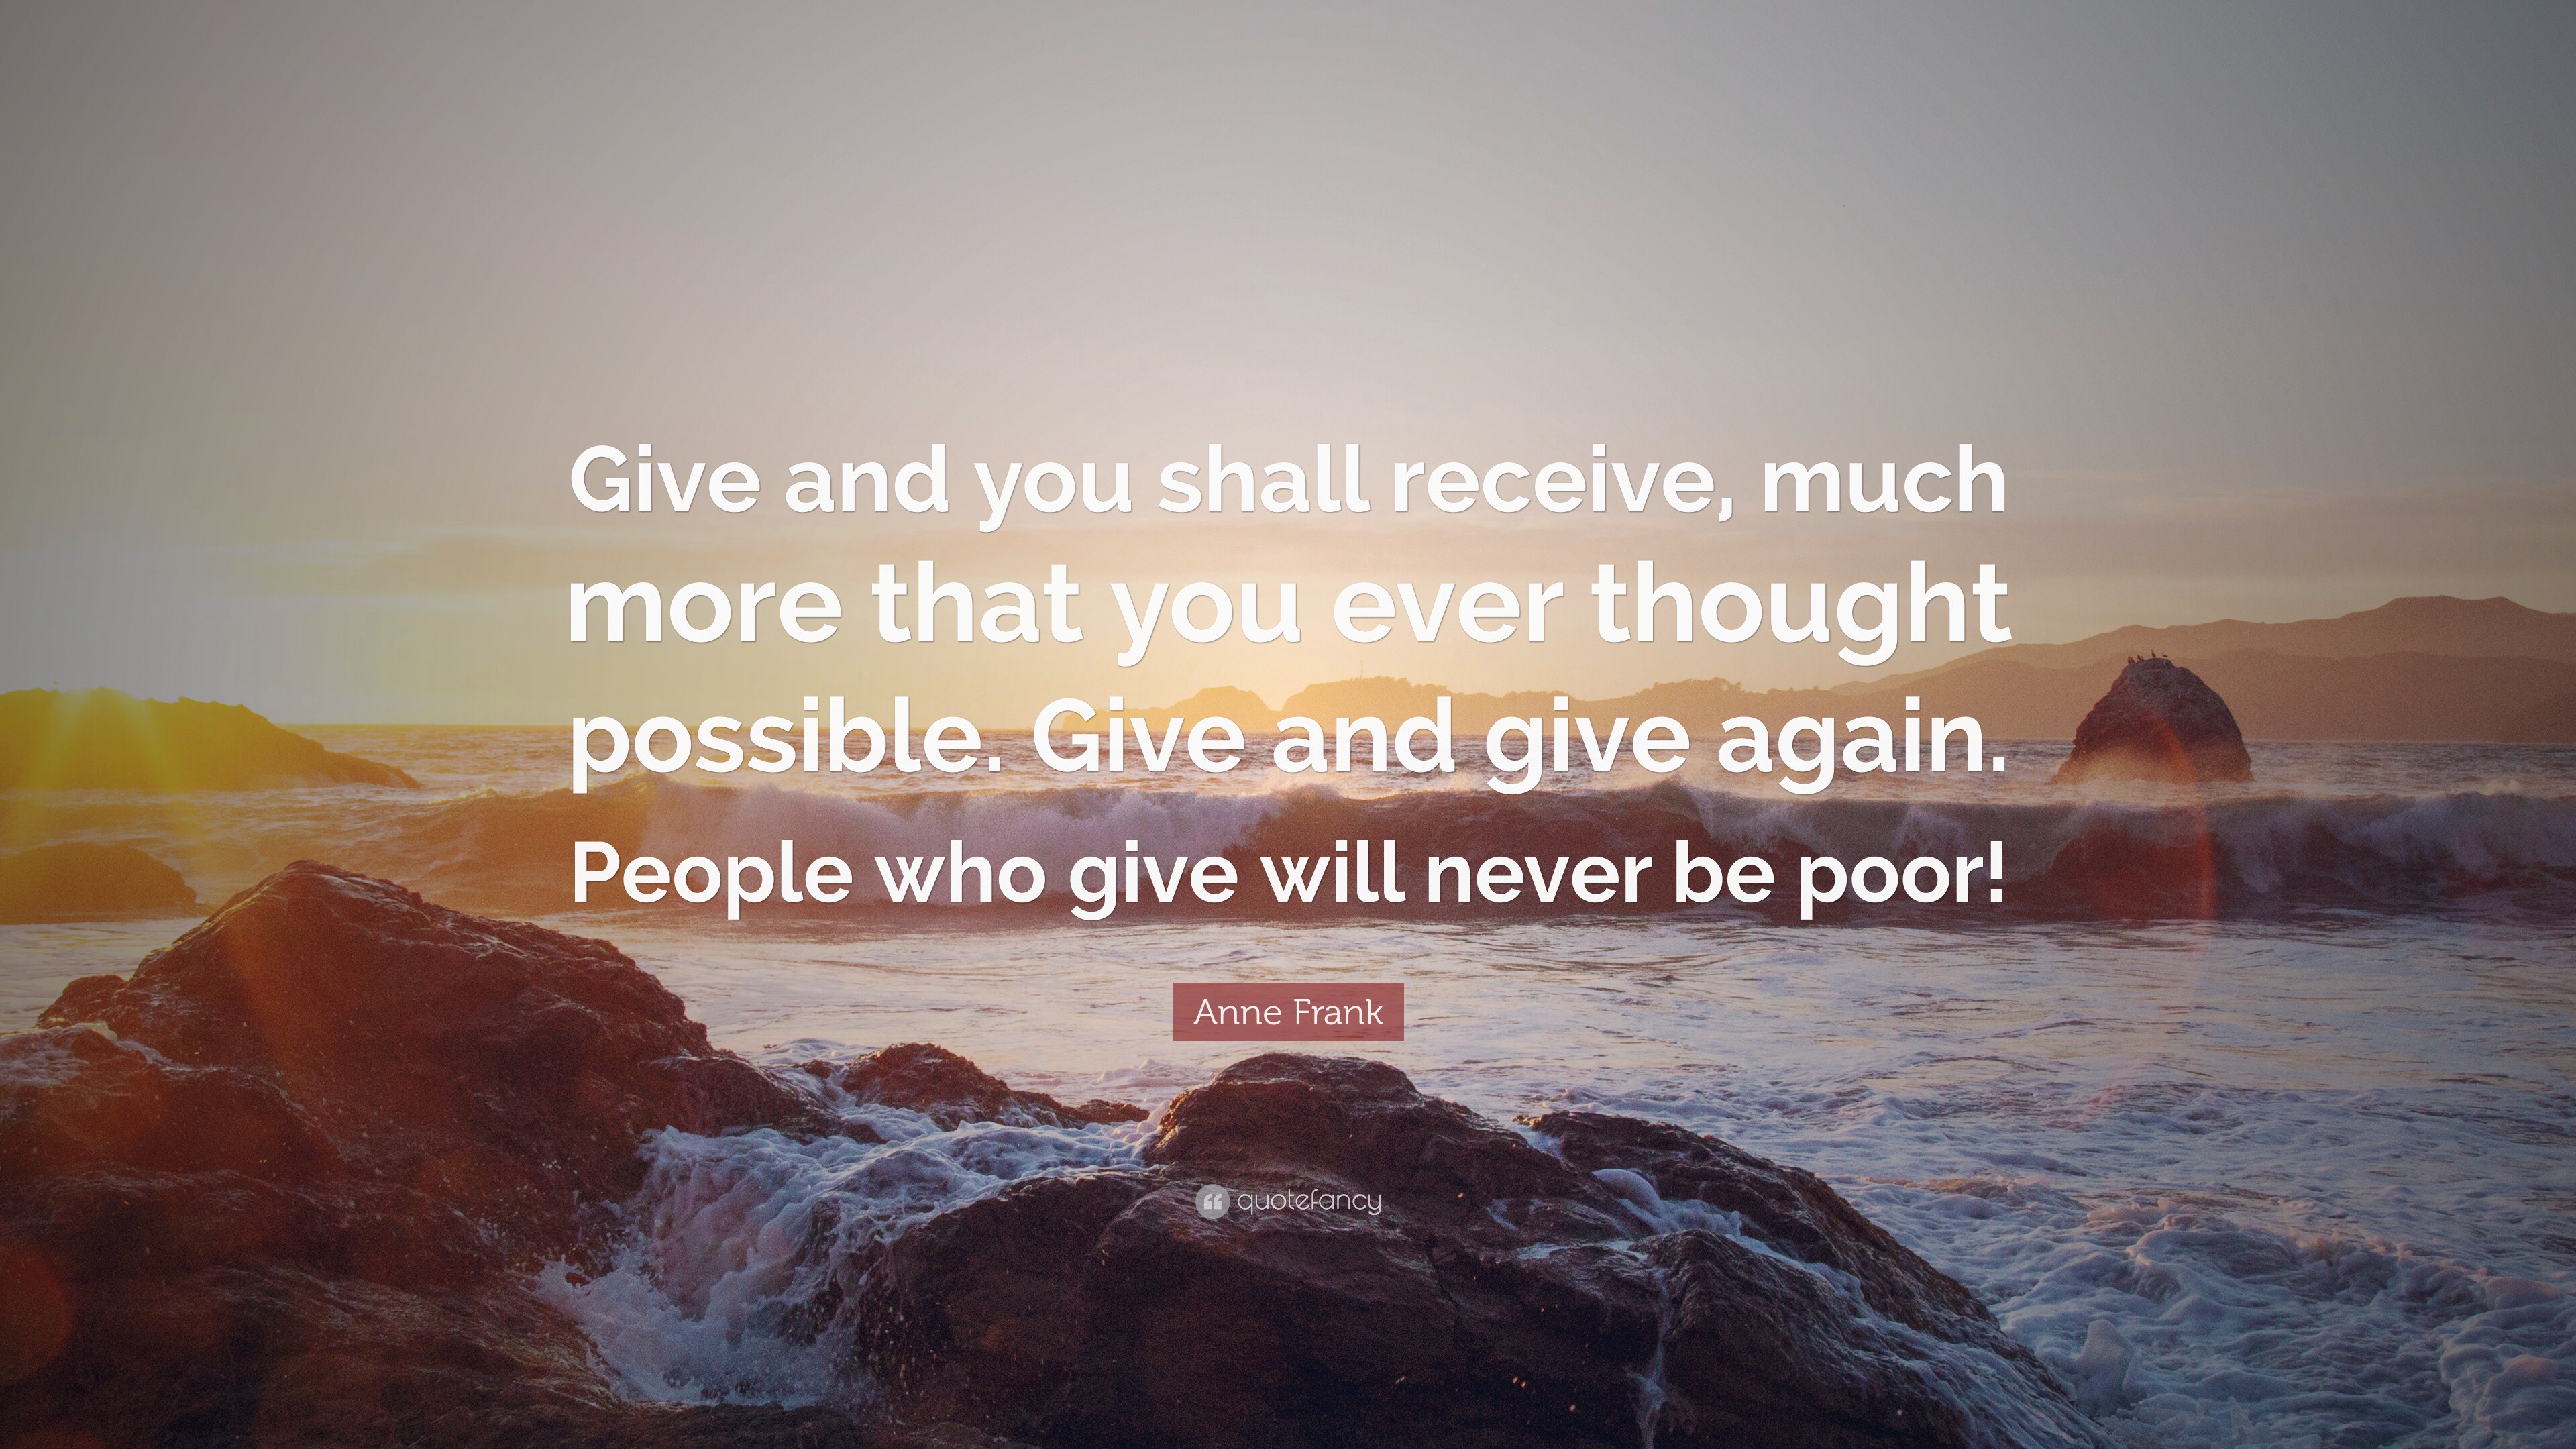 Anne Frank Quote: “Give and you shall receive, much more that you ever